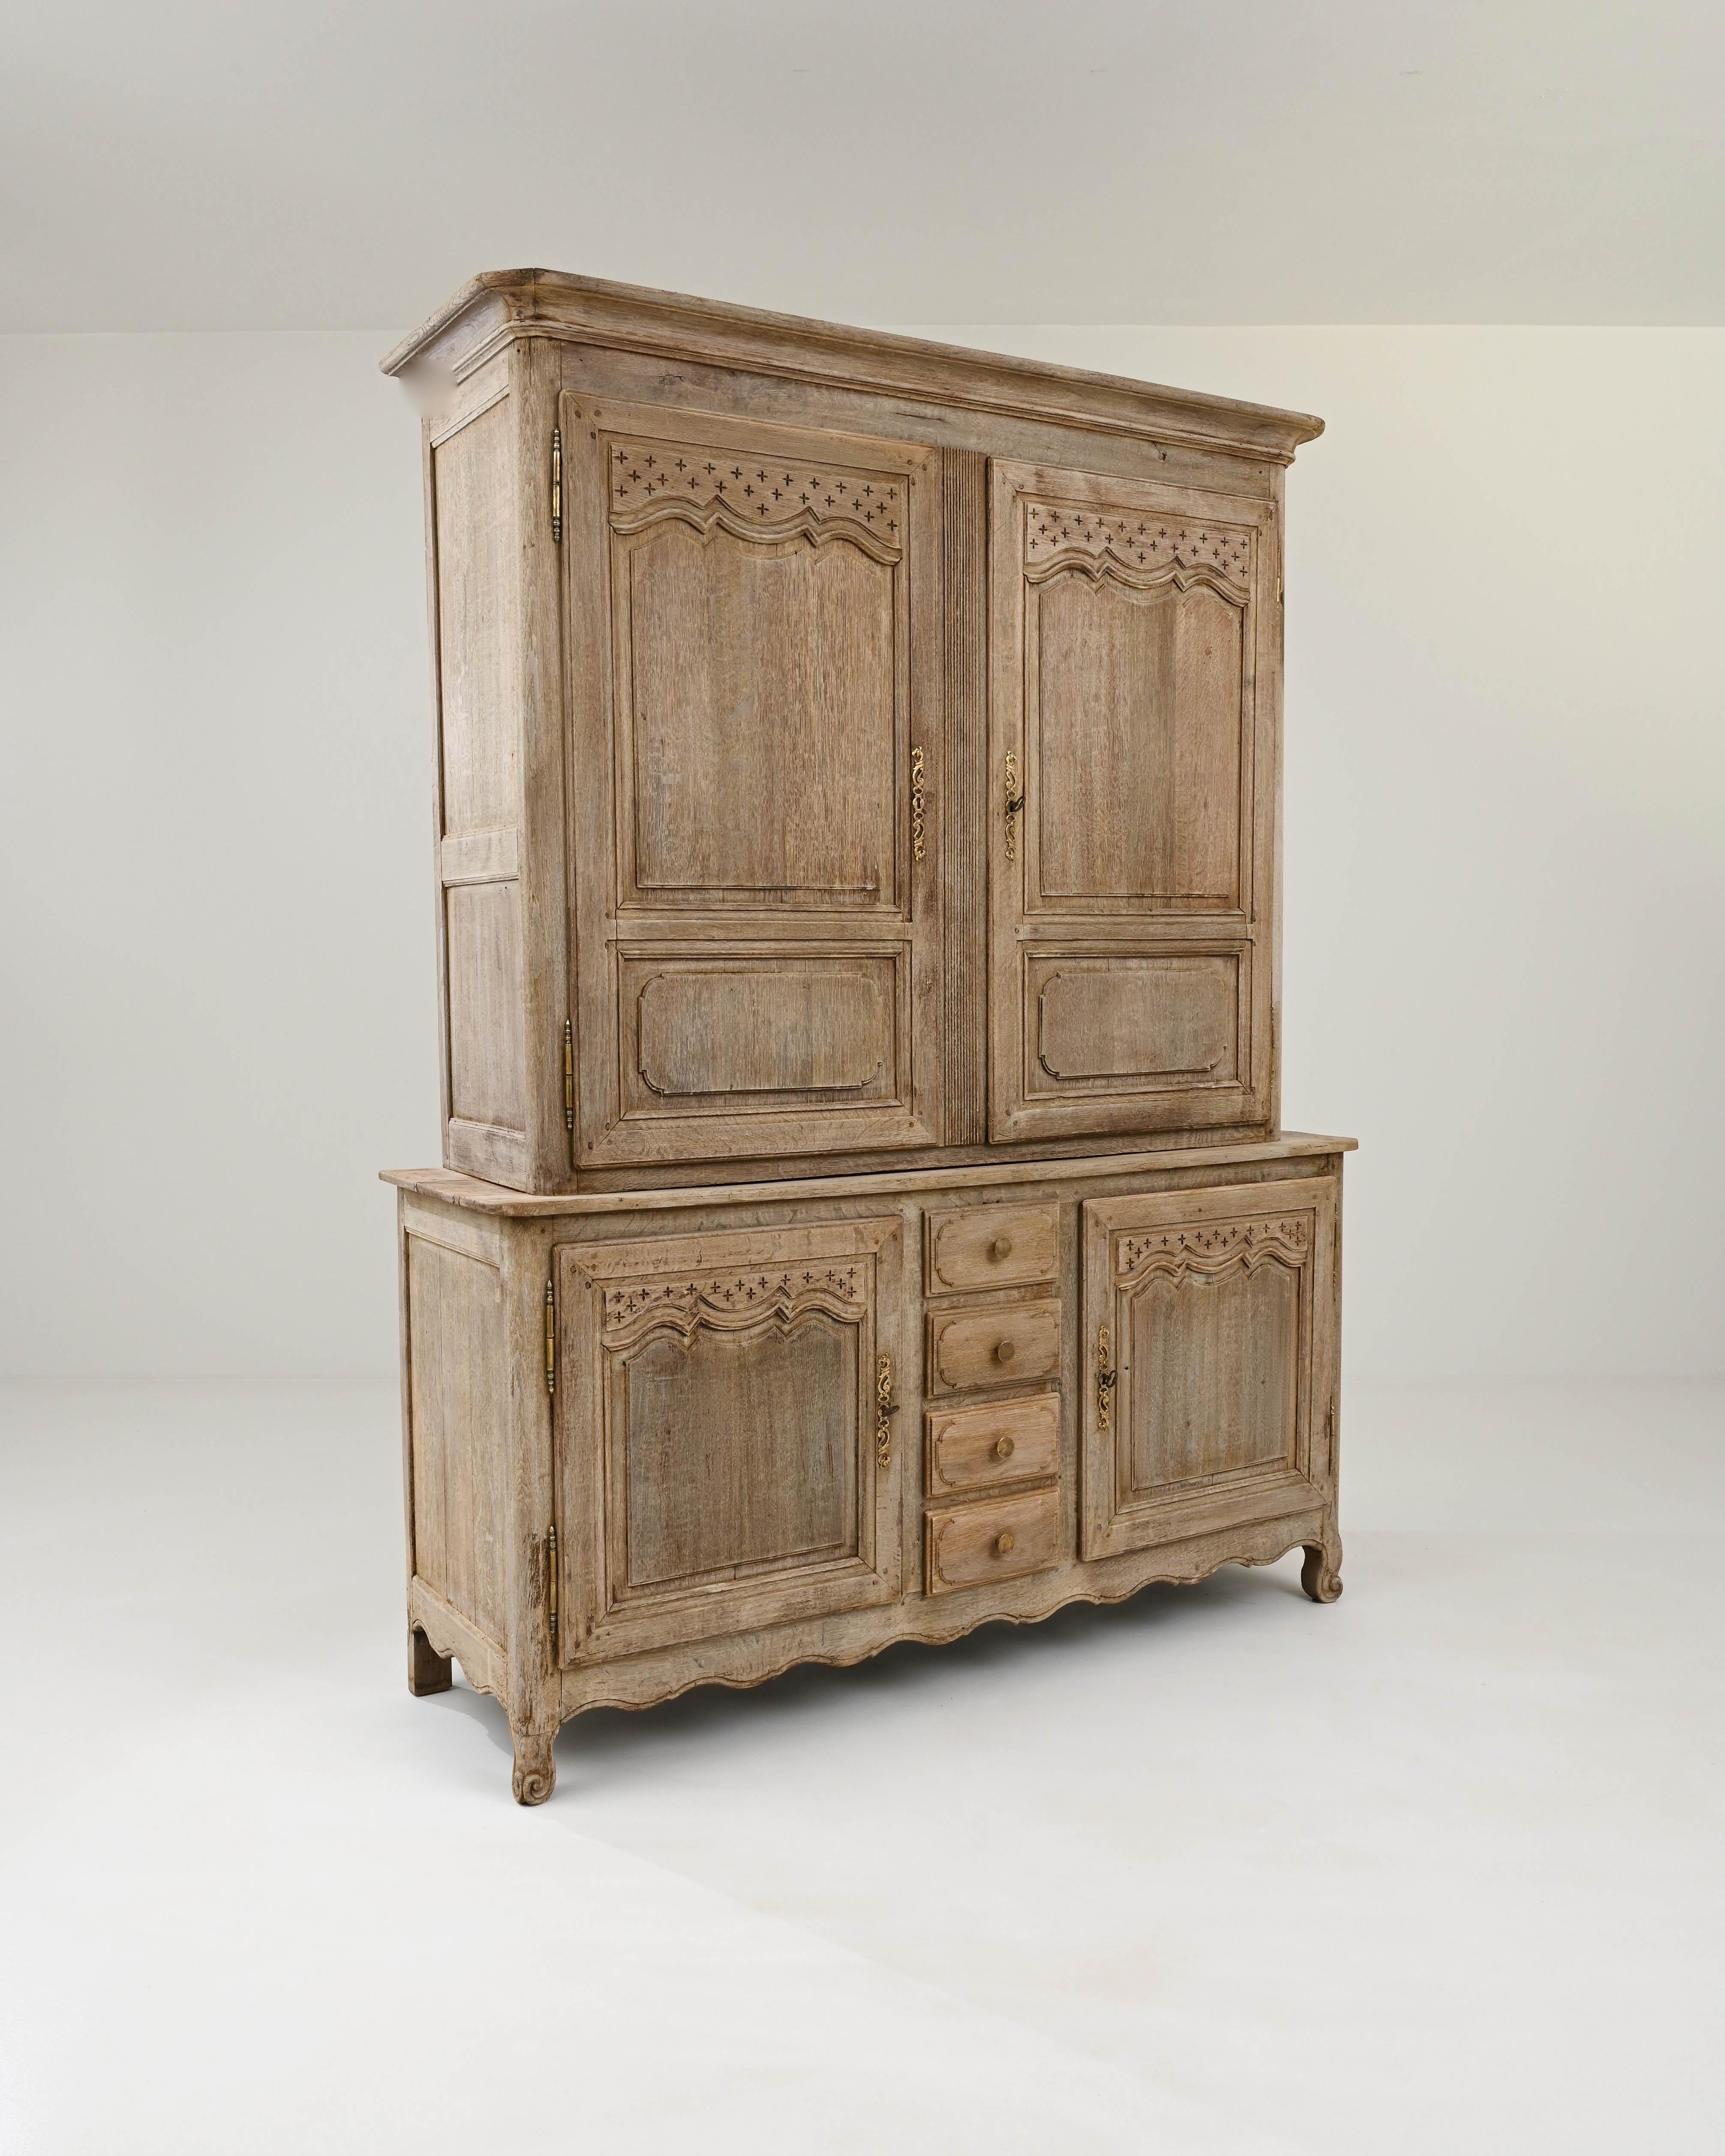 Handcrafted from oak in France circa 1820, this robust deux corps cabinet offers plenty of storage space and an elegant style. The wider bottom cabinet gives the piece a sense of gravity,  decorated with a scalloped skirt and elevated on short